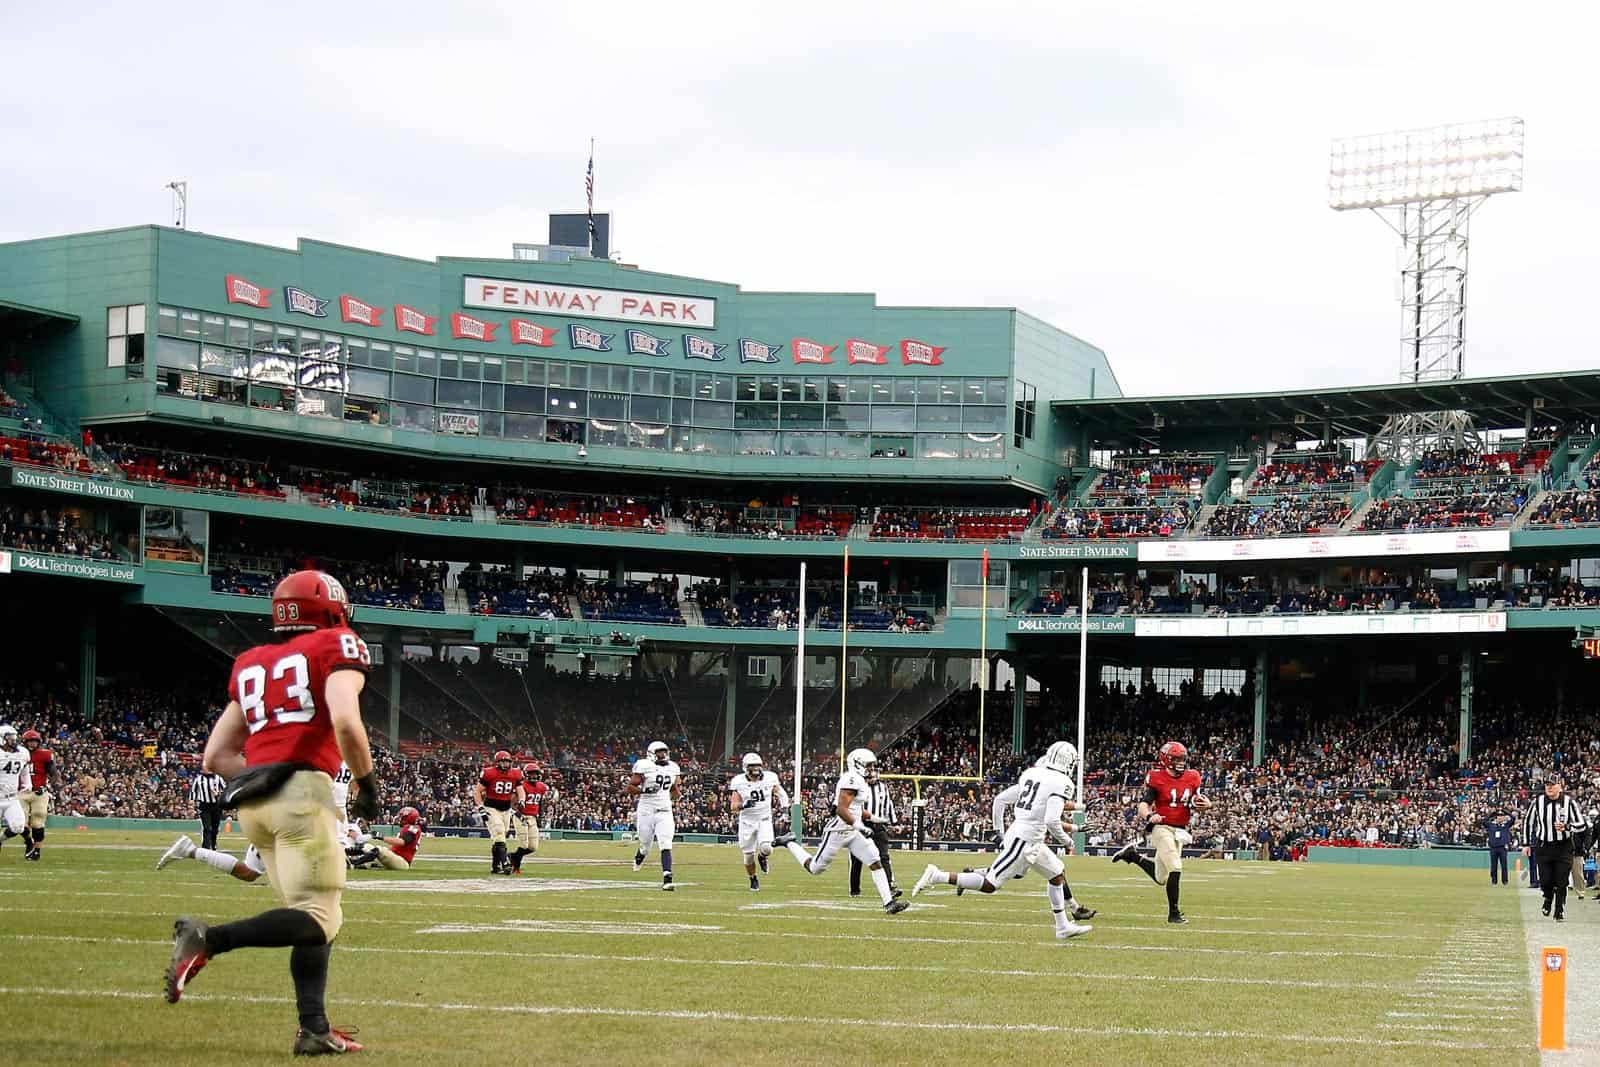 Fenway Park to Host College Football Bowl Game – SportsTravel